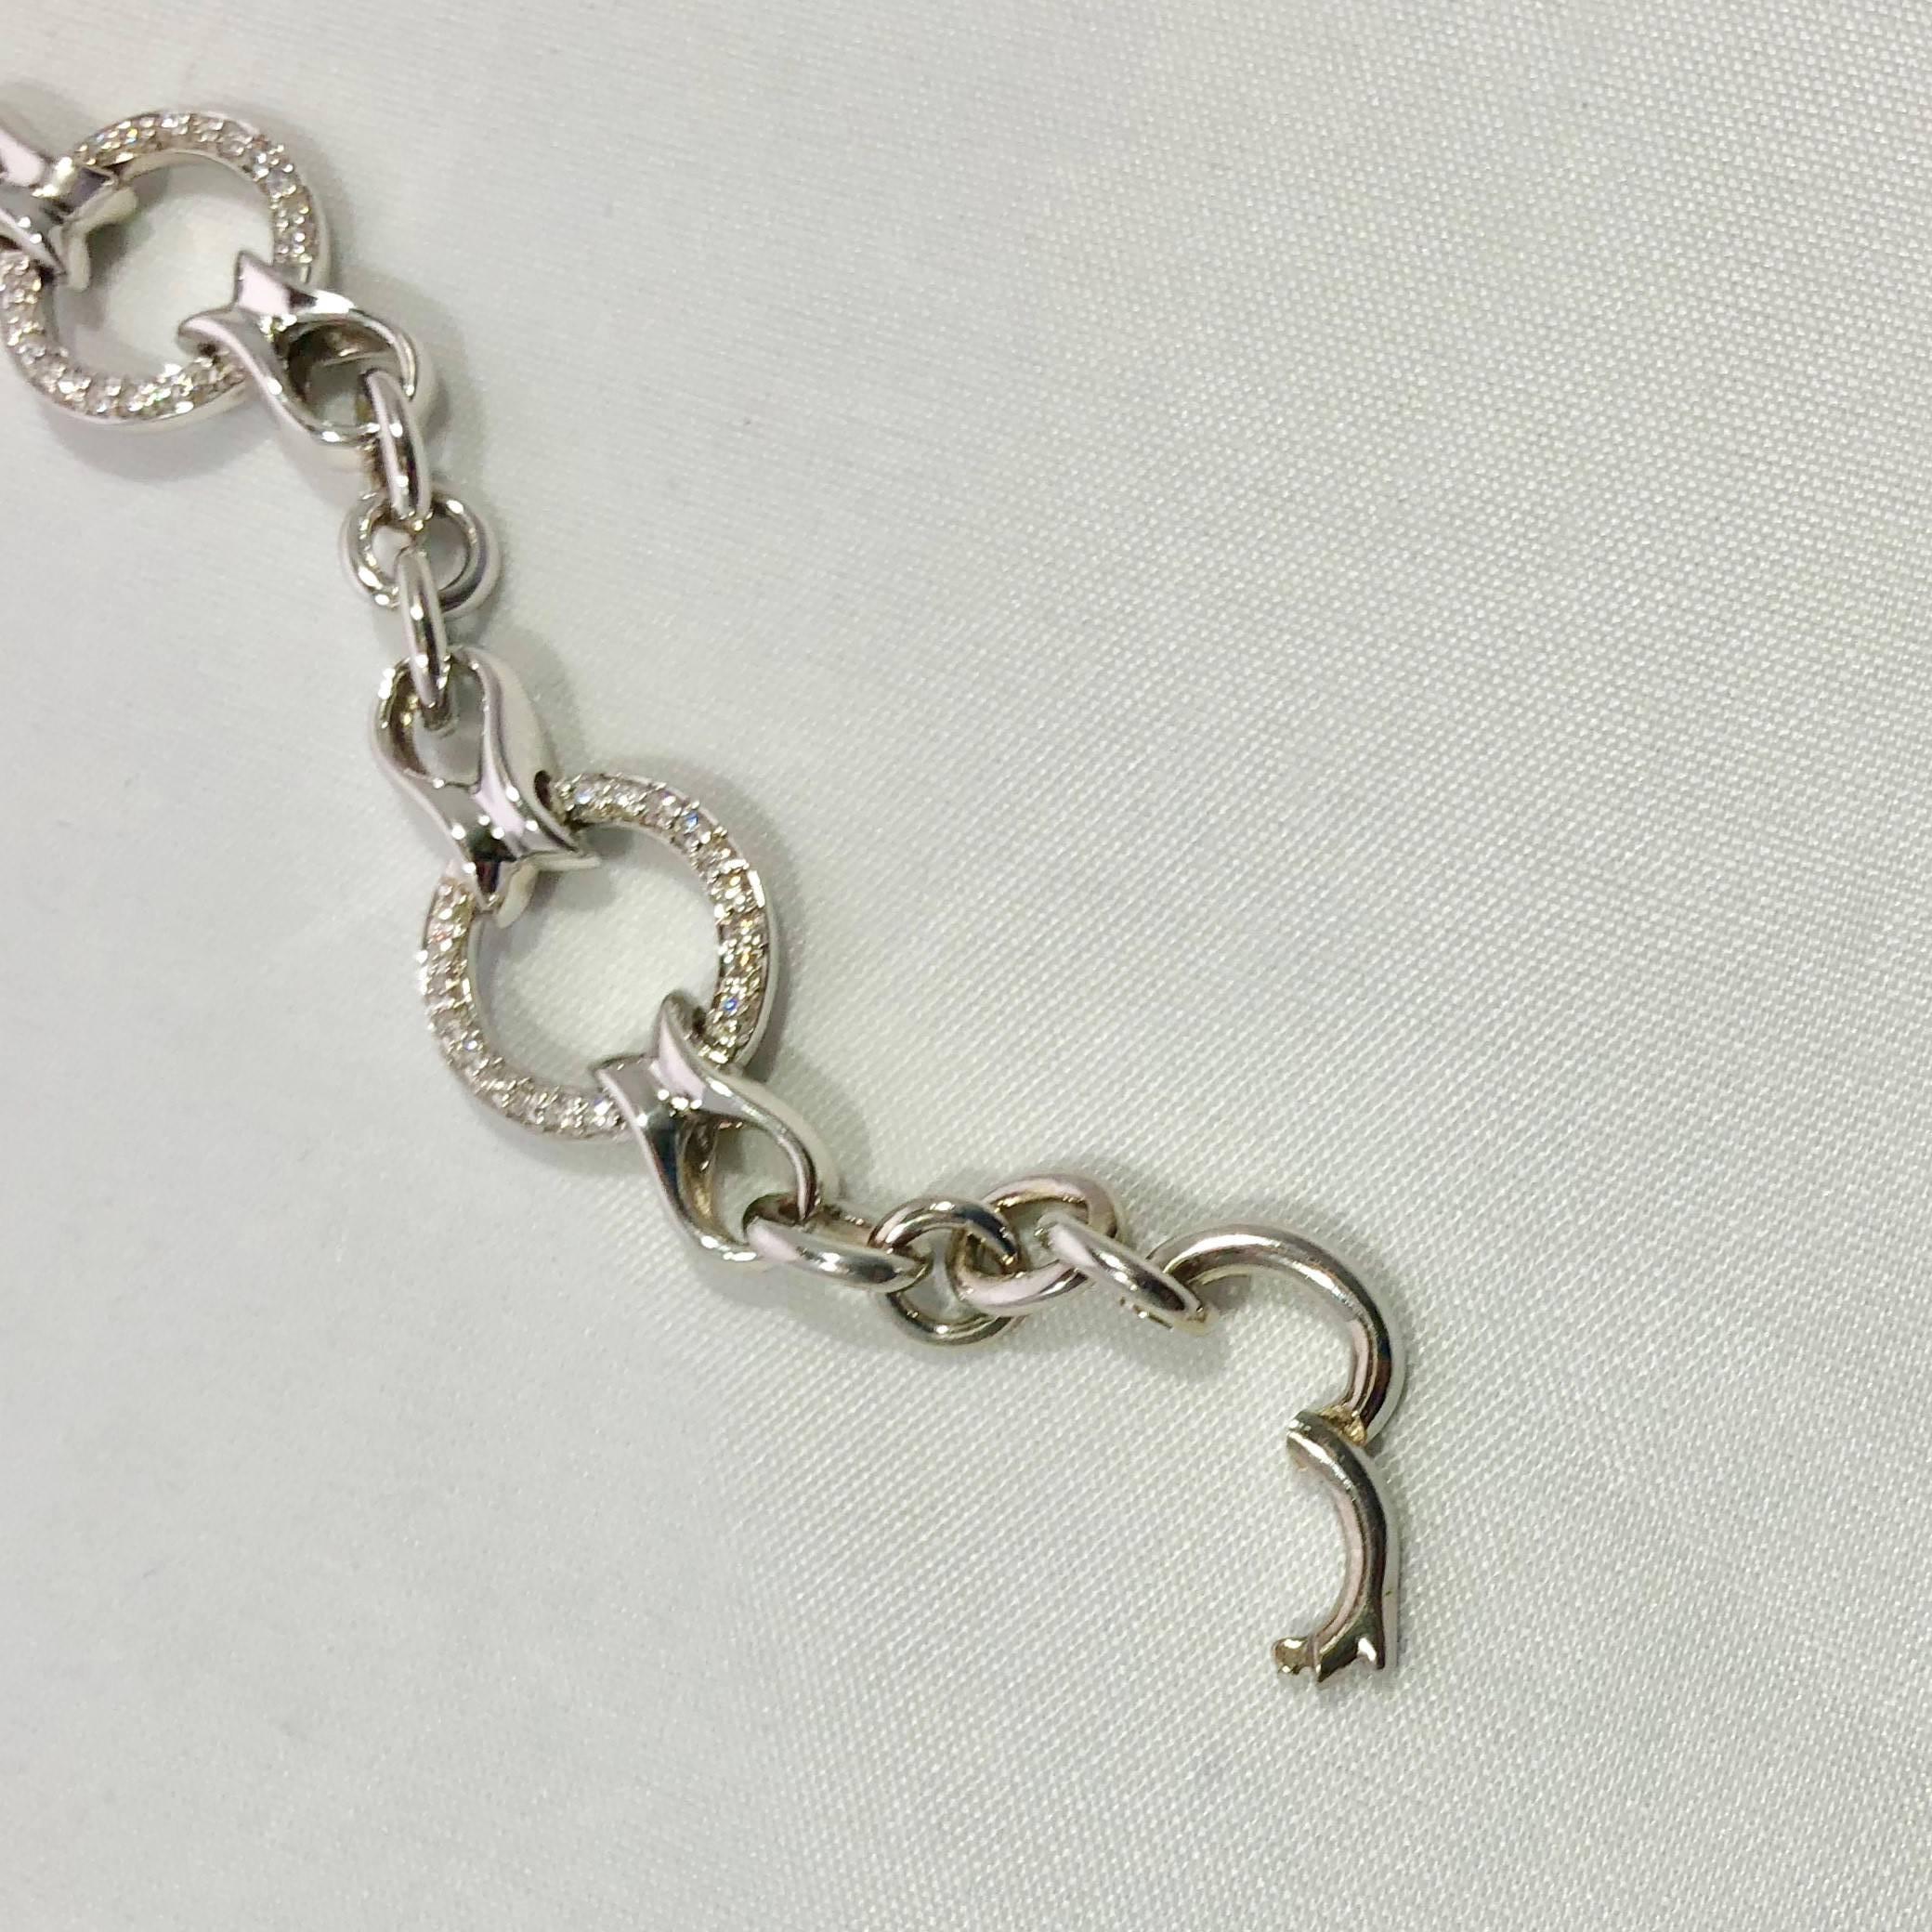 Honora 14 Karat White Gold and Round Diamond Chain Link Tennis Bracelet In Excellent Condition For Sale In Mansfield, OH